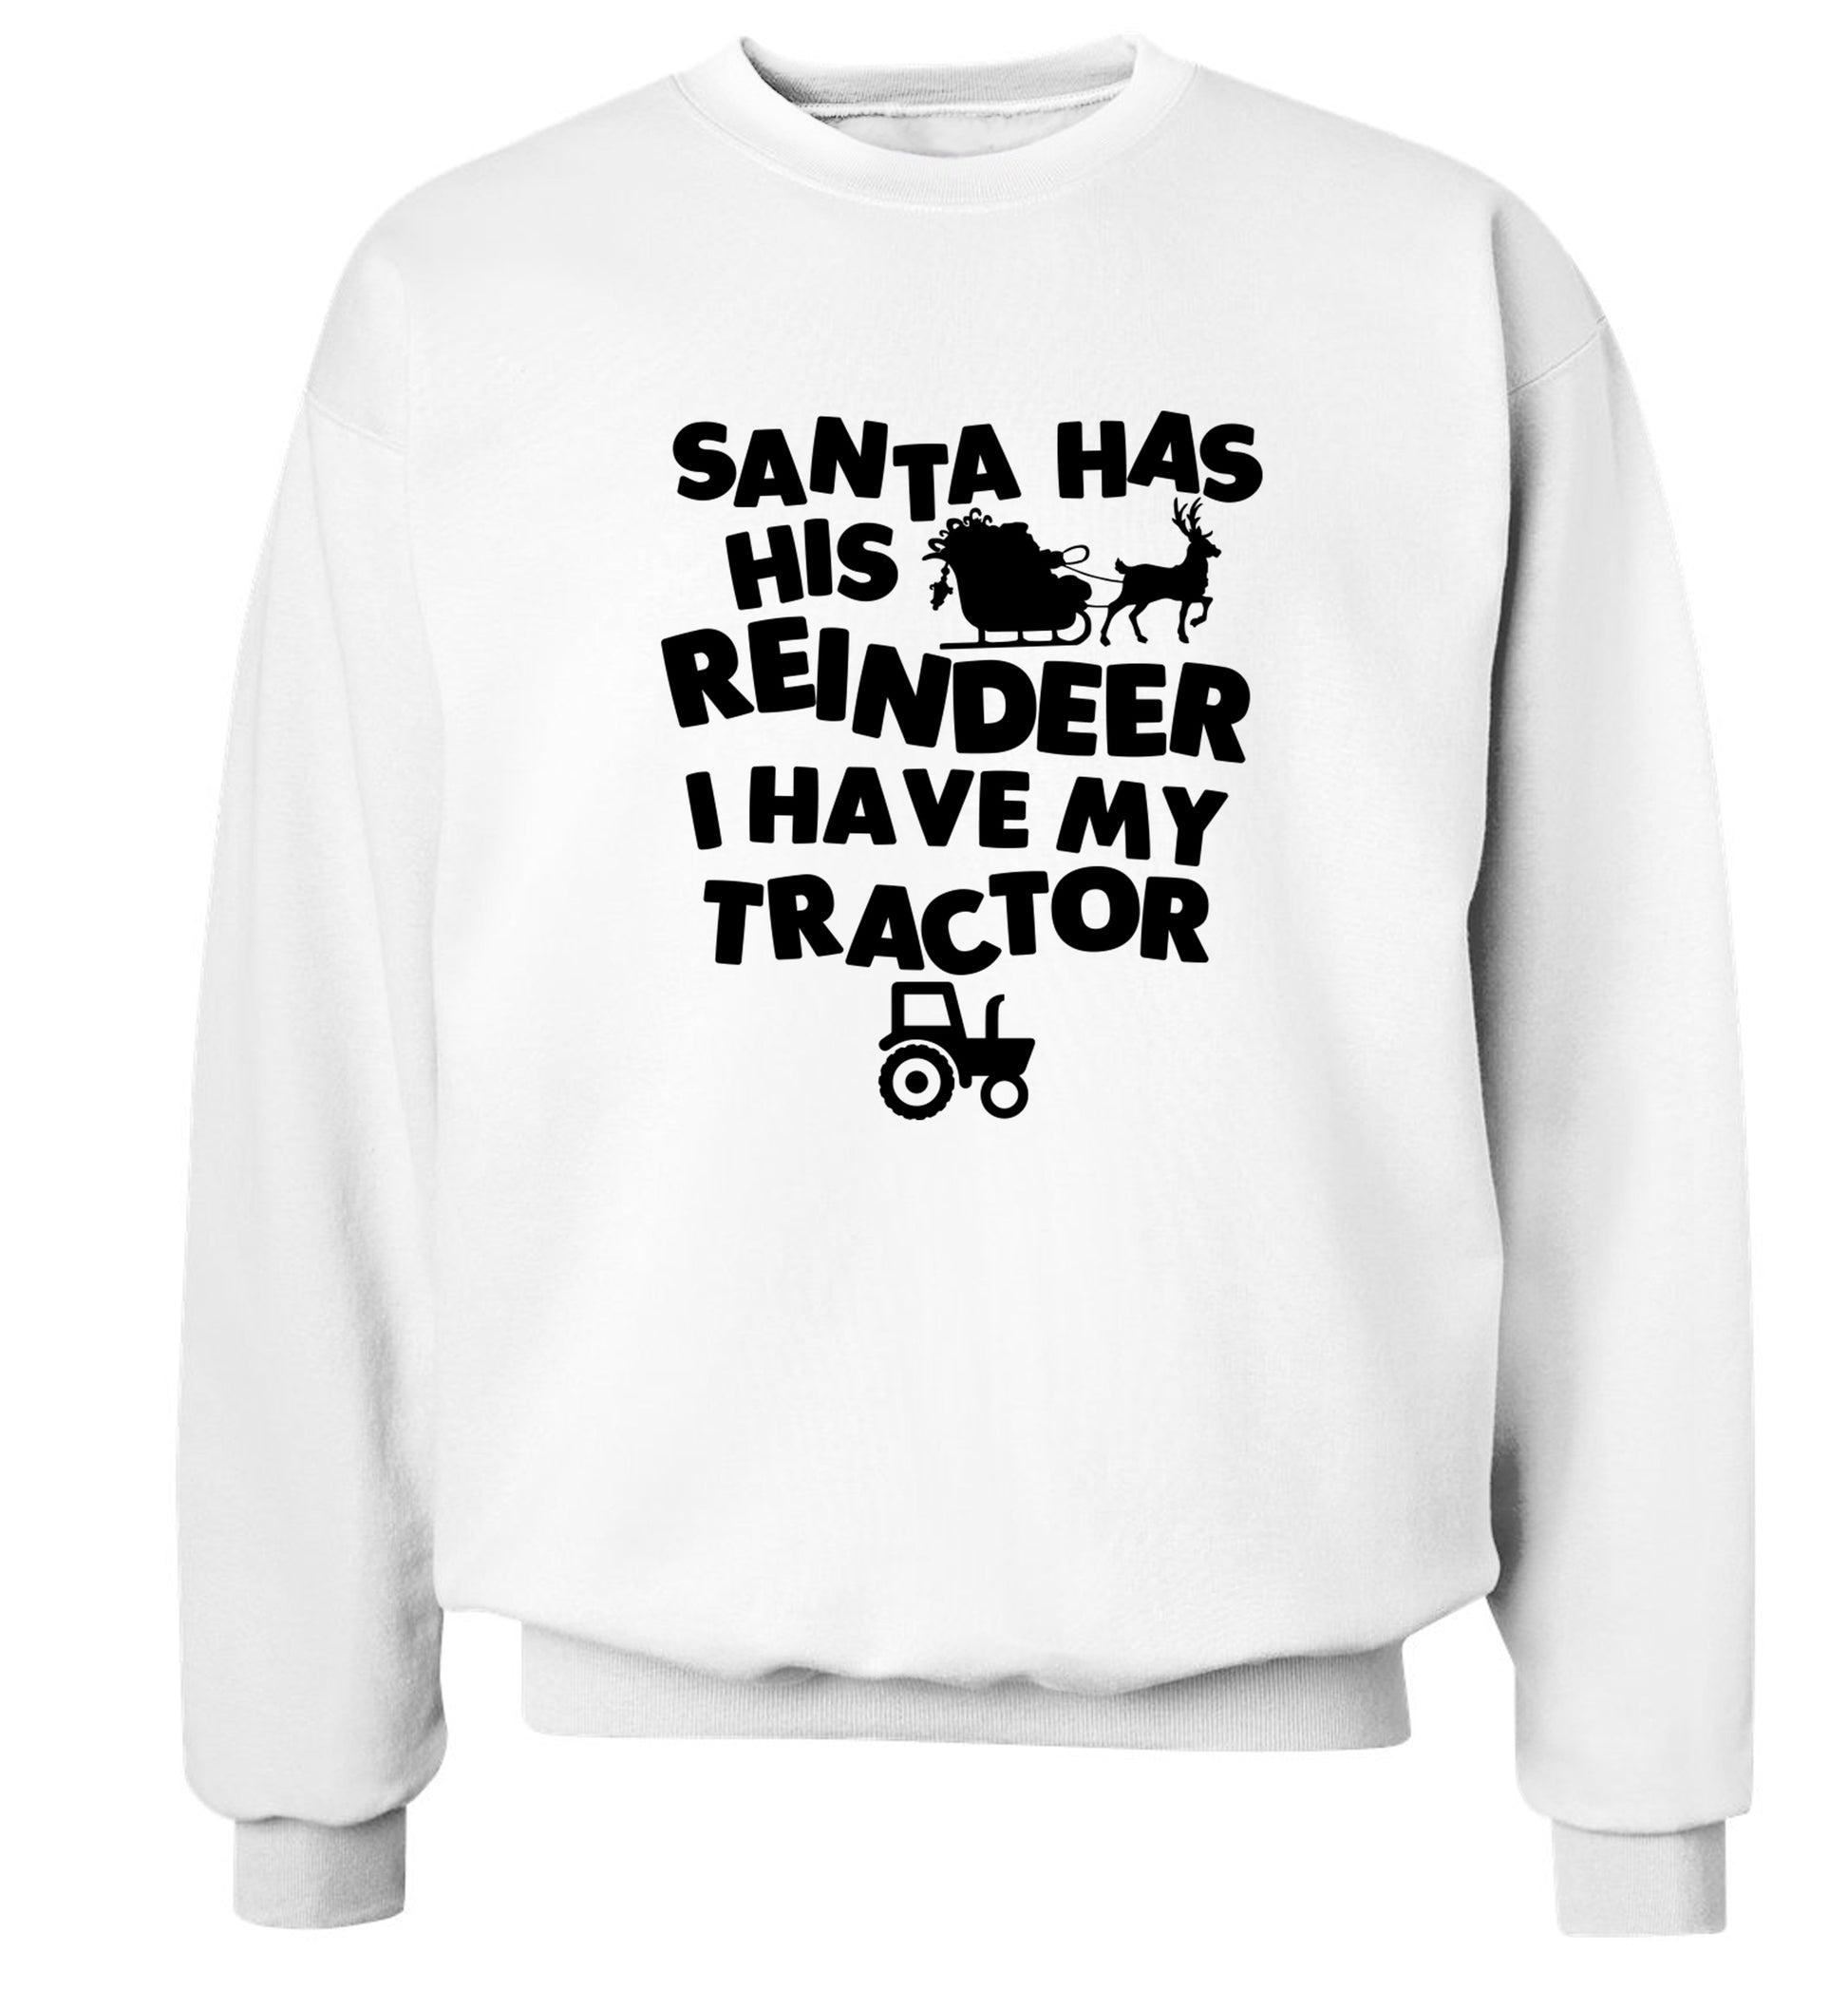 Santa has his reindeer I have my tractor Adult's unisex white Sweater 2XL